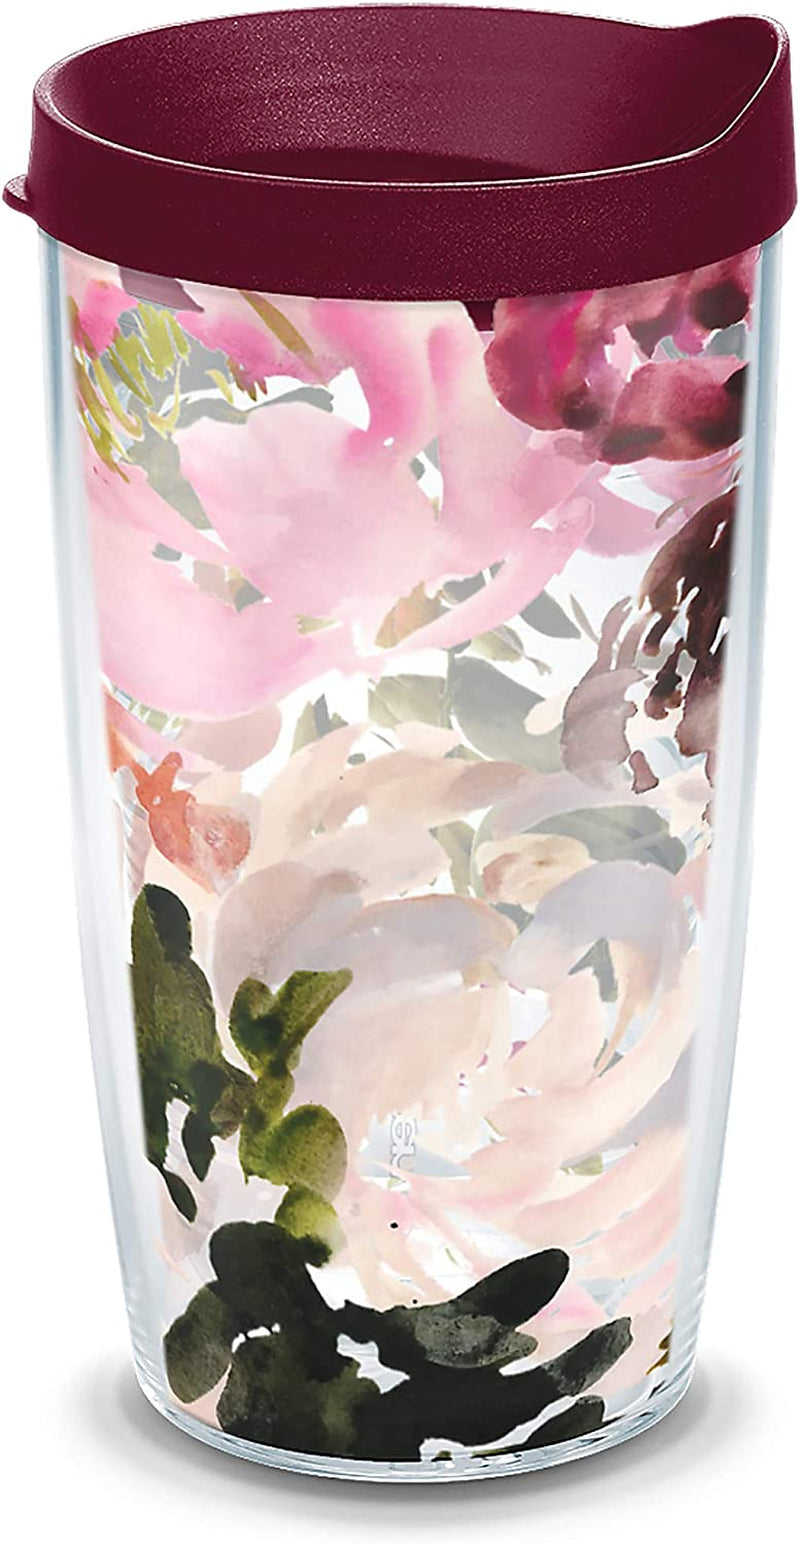 Tervis Made in USA Double Walled Kelly Ventura Floral Collection Insulated Tumbler Cup Keeps Drinks Cold & Hot, 16Oz 4Pk - Classic, Assorted Home & Garden > Kitchen & Dining > Tableware > Drinkware Tervis Posy 16oz - Classic 